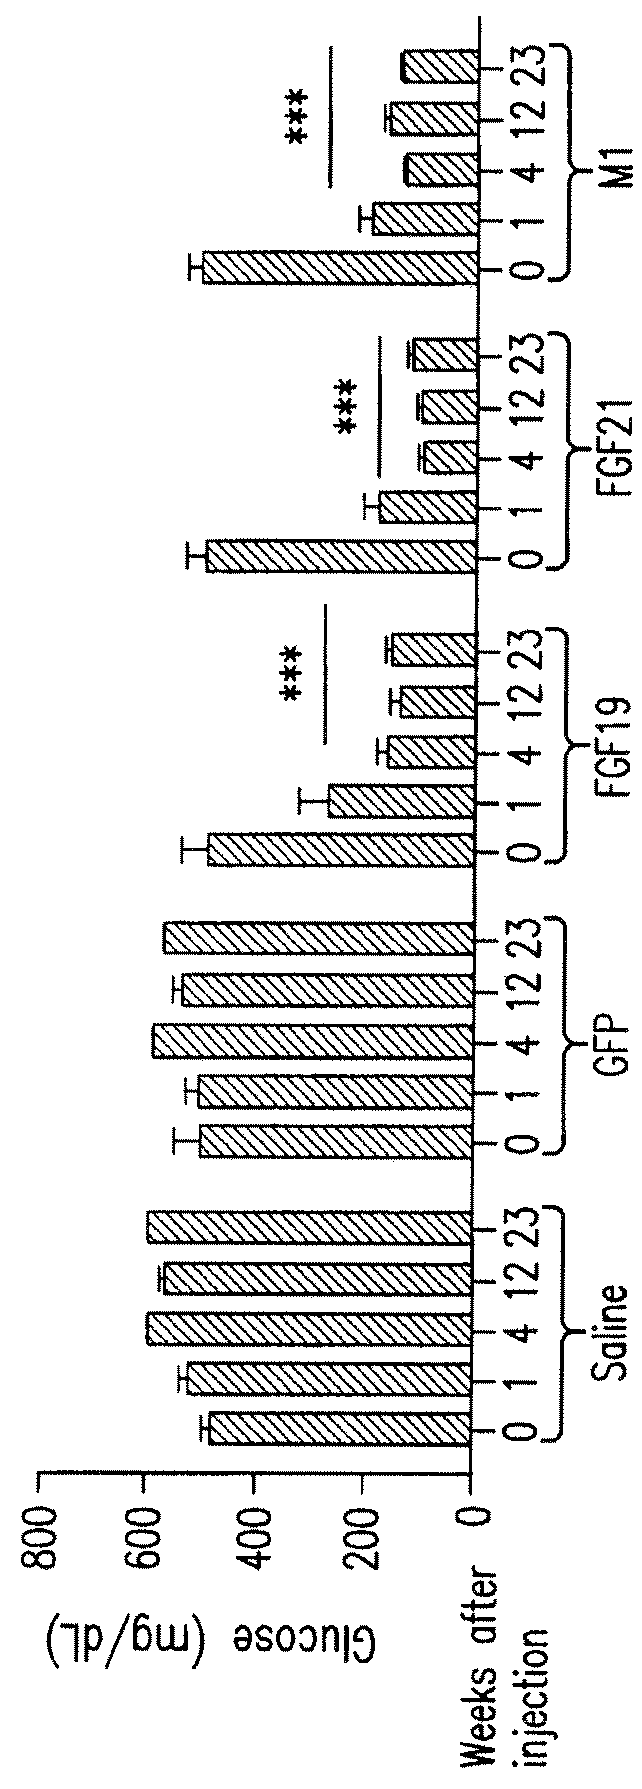 Methods of using compositions comprising variants and fusions of FGF19 polypeptides for reducing glucose levels in a subject